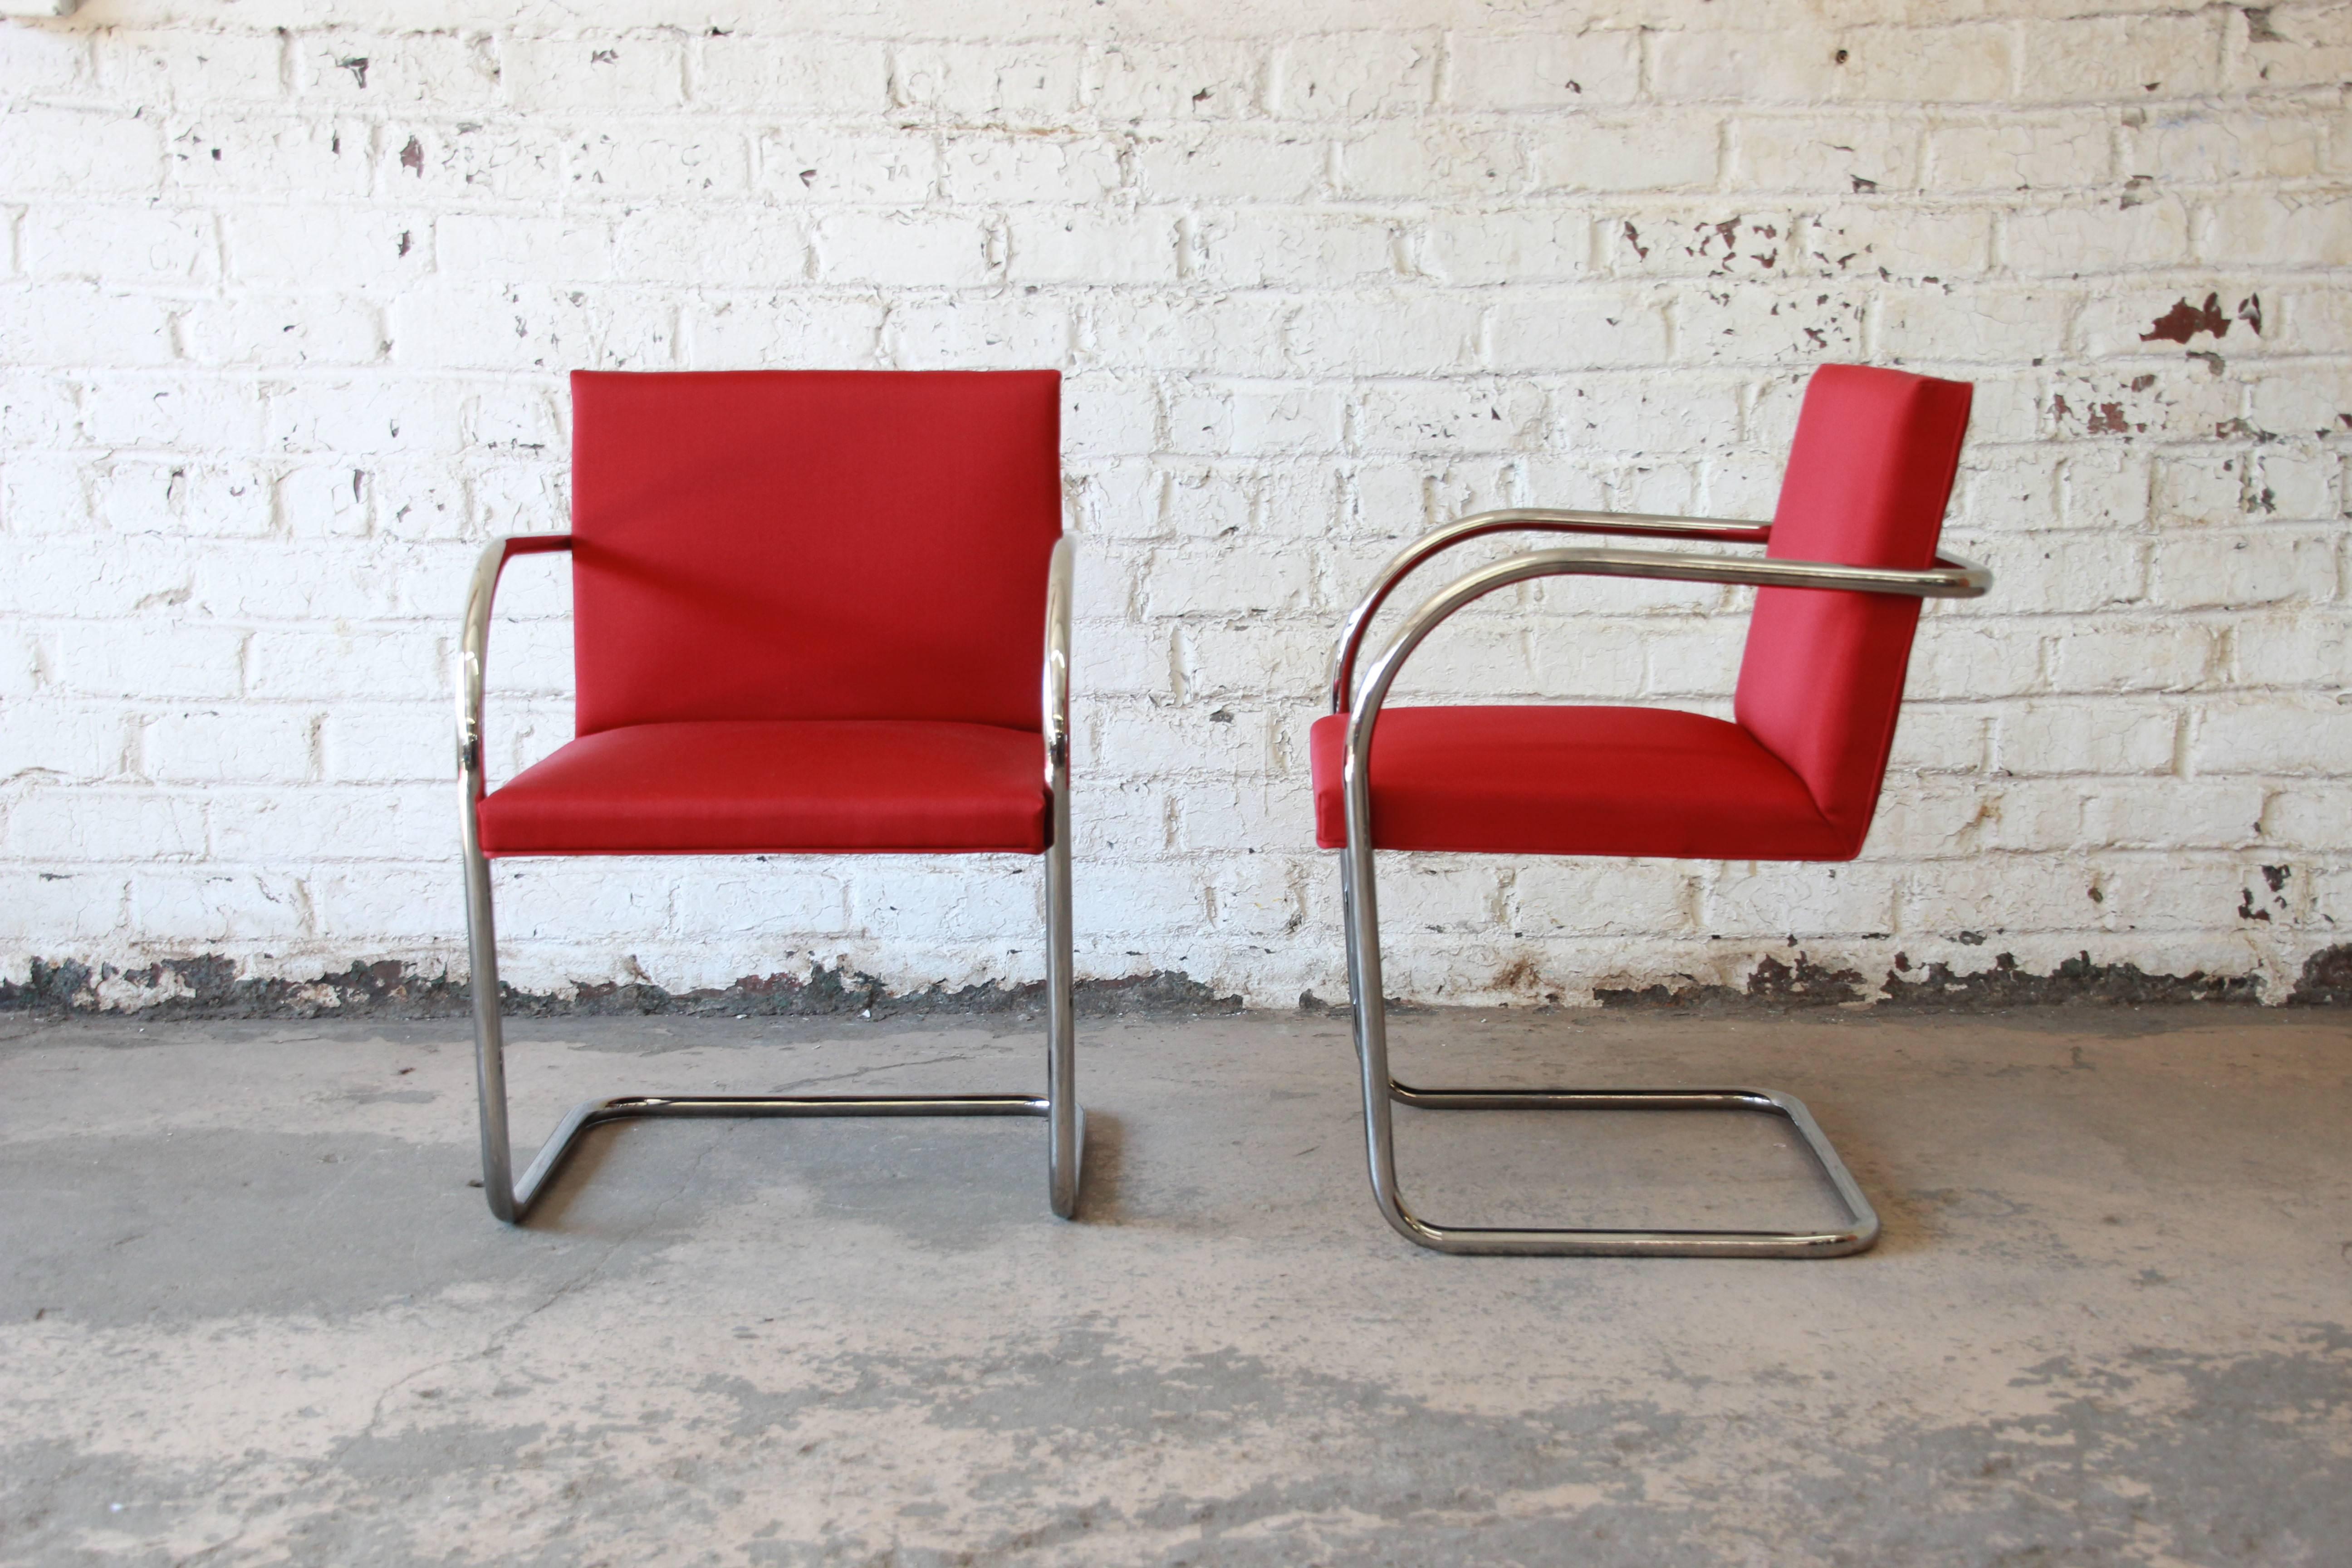 An excellent pair of Brno tubular chairs in crimson red wool upholstery. Designed by Ludwig Mies van der Rohe in 1930 for the Tugendhat House. Chrome-plated steel frame. Signed label Knoll International. Arm height is 25.5